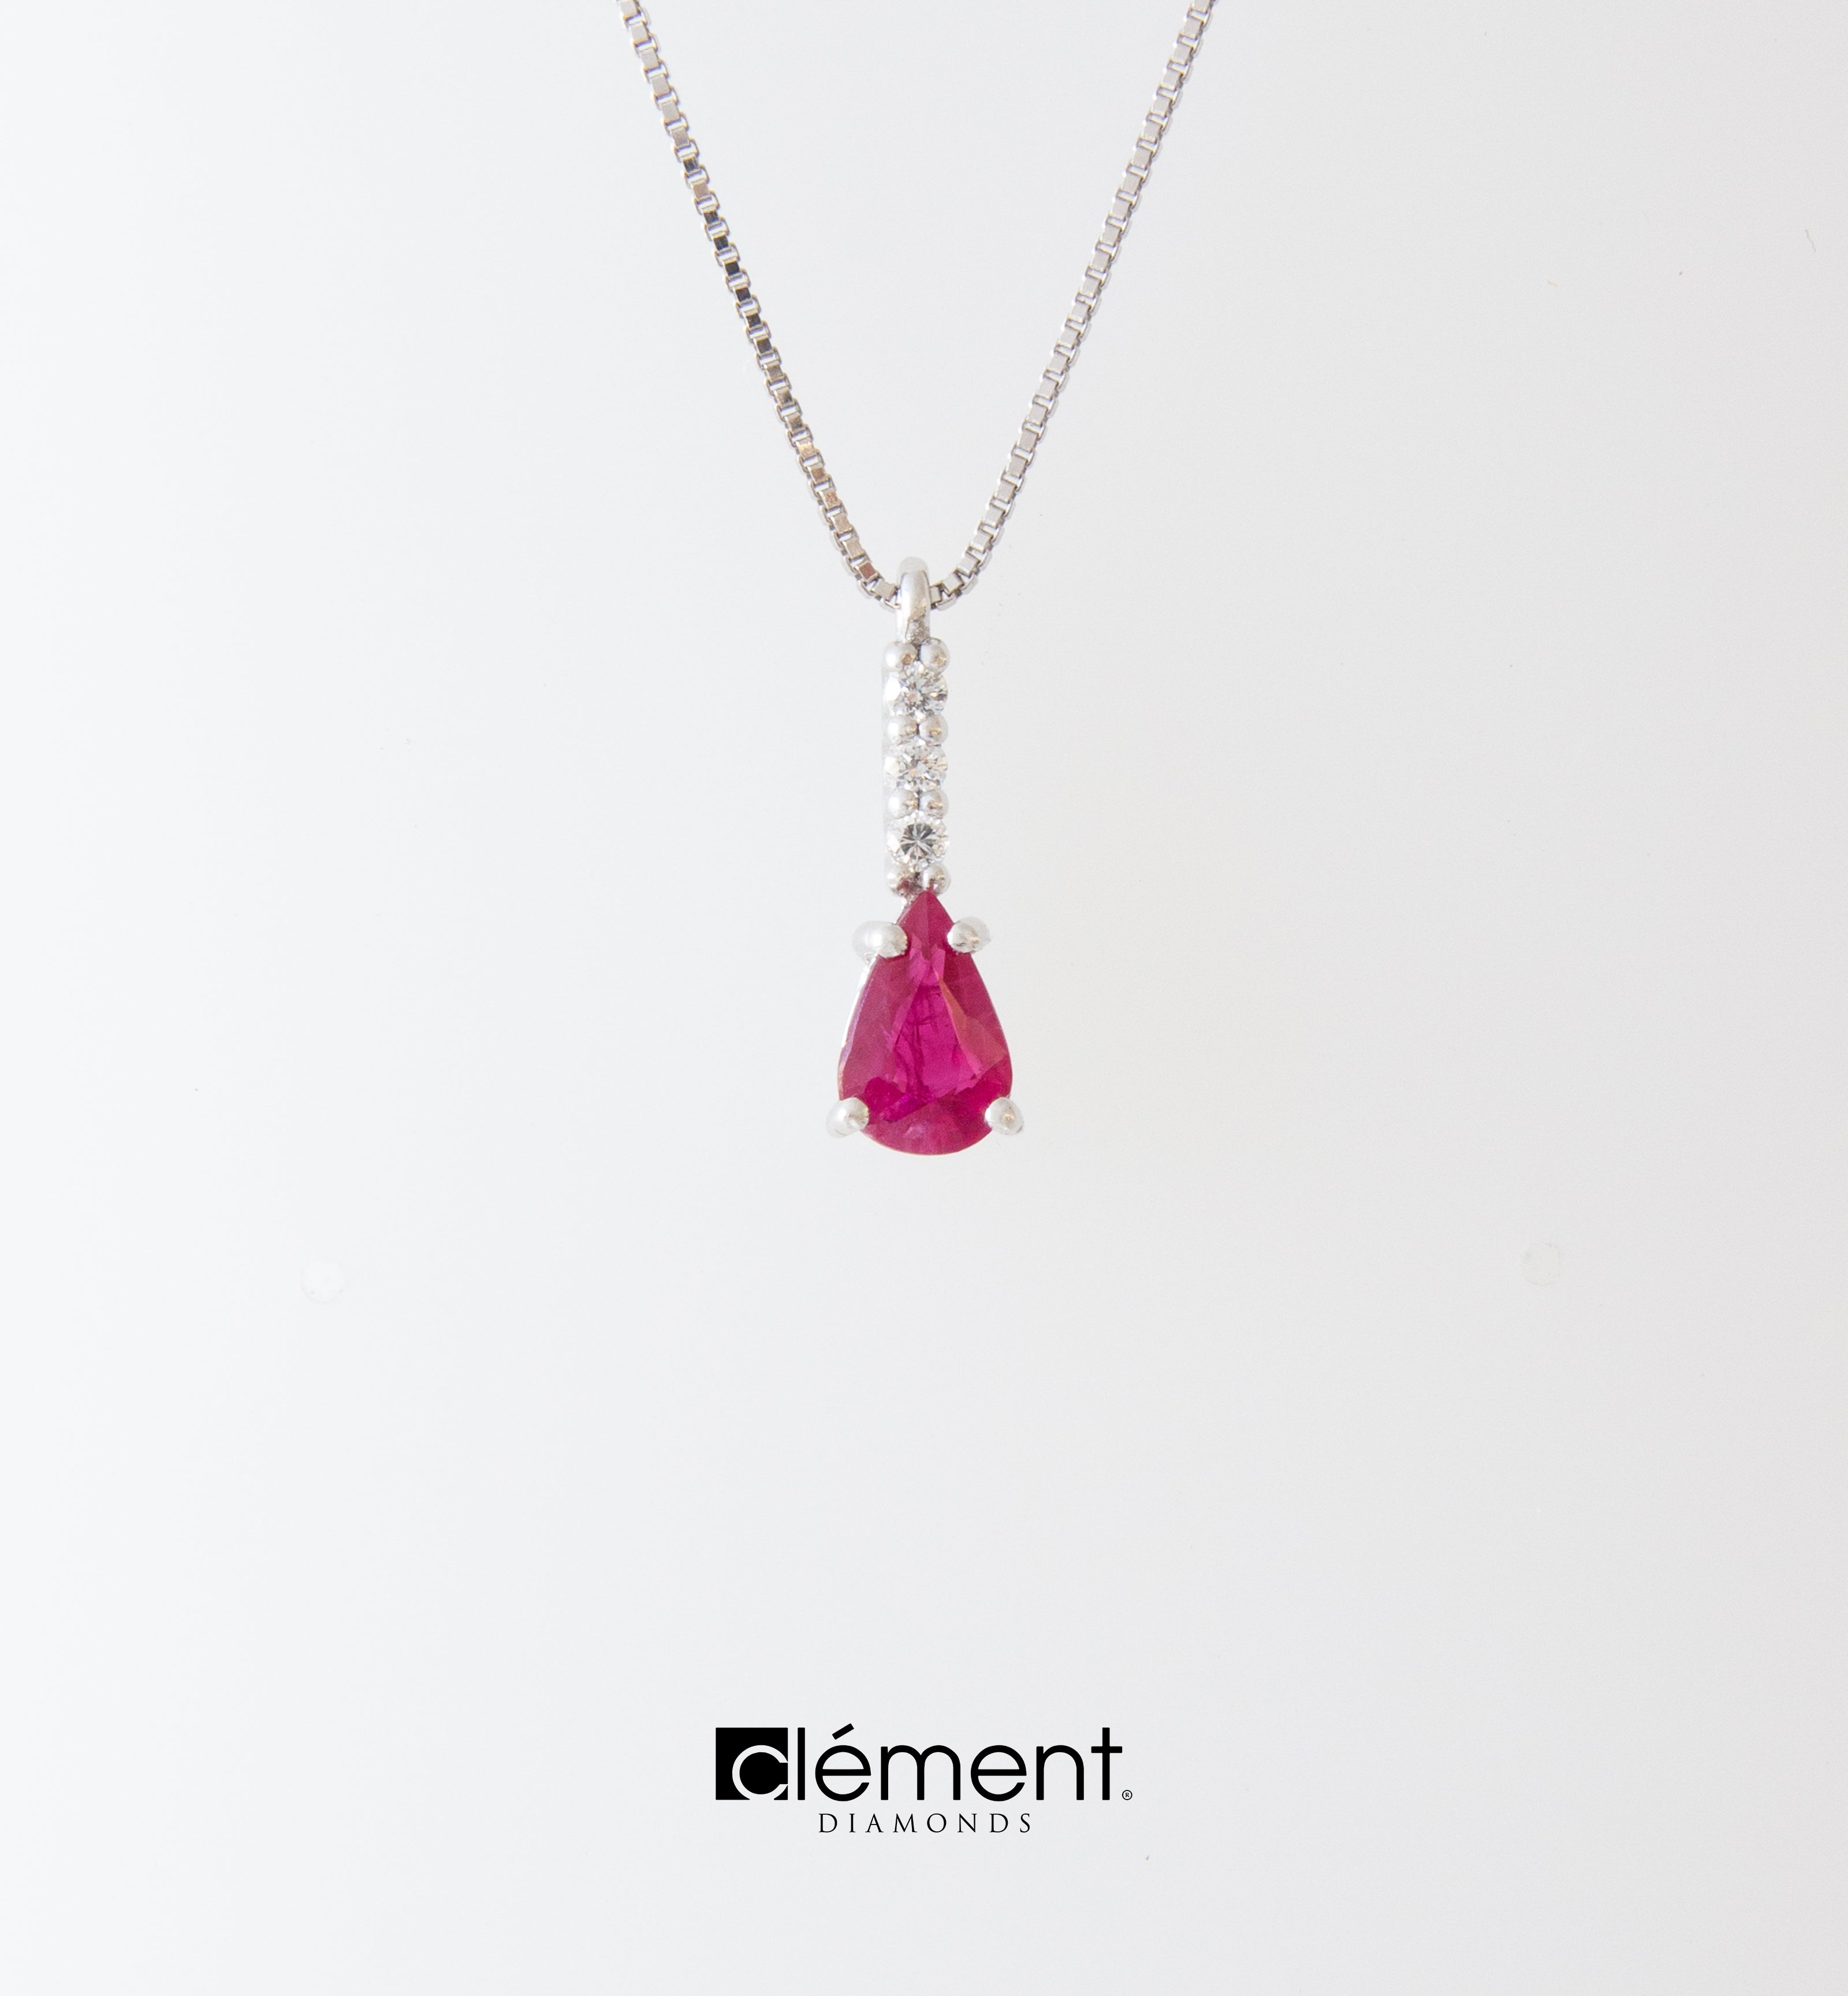 18ct White Gold Diamond and Ruby Pendant